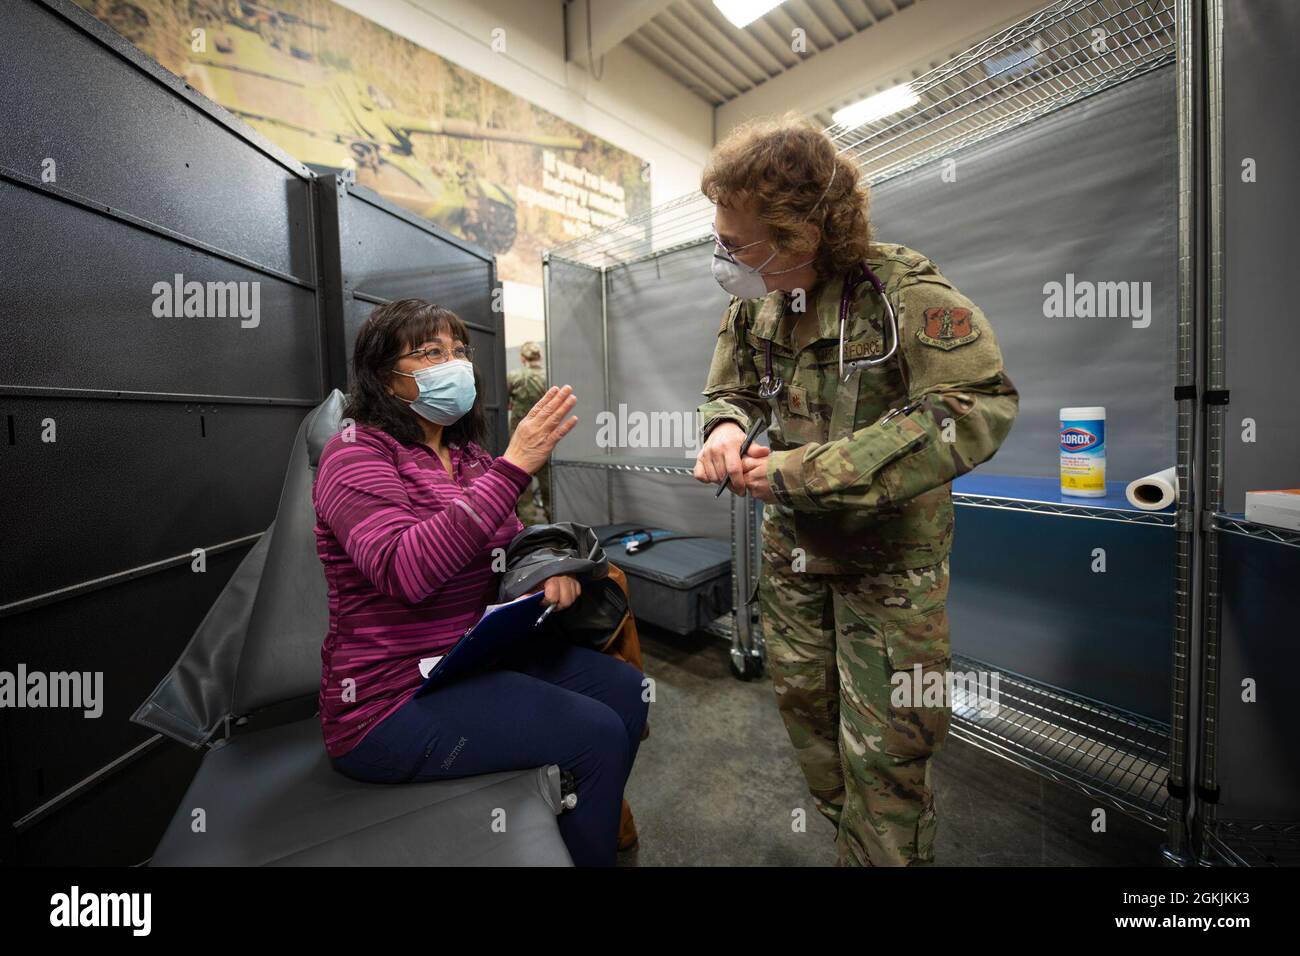 U.S. Air National Guard Maj. Debra Triplehorn, 168th Medical Group, 168th Wing, meets with a Kodiak Island resident during Arctic Care 2021 in Kodiak, Alaska, on May 5, 2021. Arctic Care 2021 provides medical troops and support personnel “hands-on” readiness training while providing no-cost medical care to the people of Kodiak, Alaska. Stock Photo